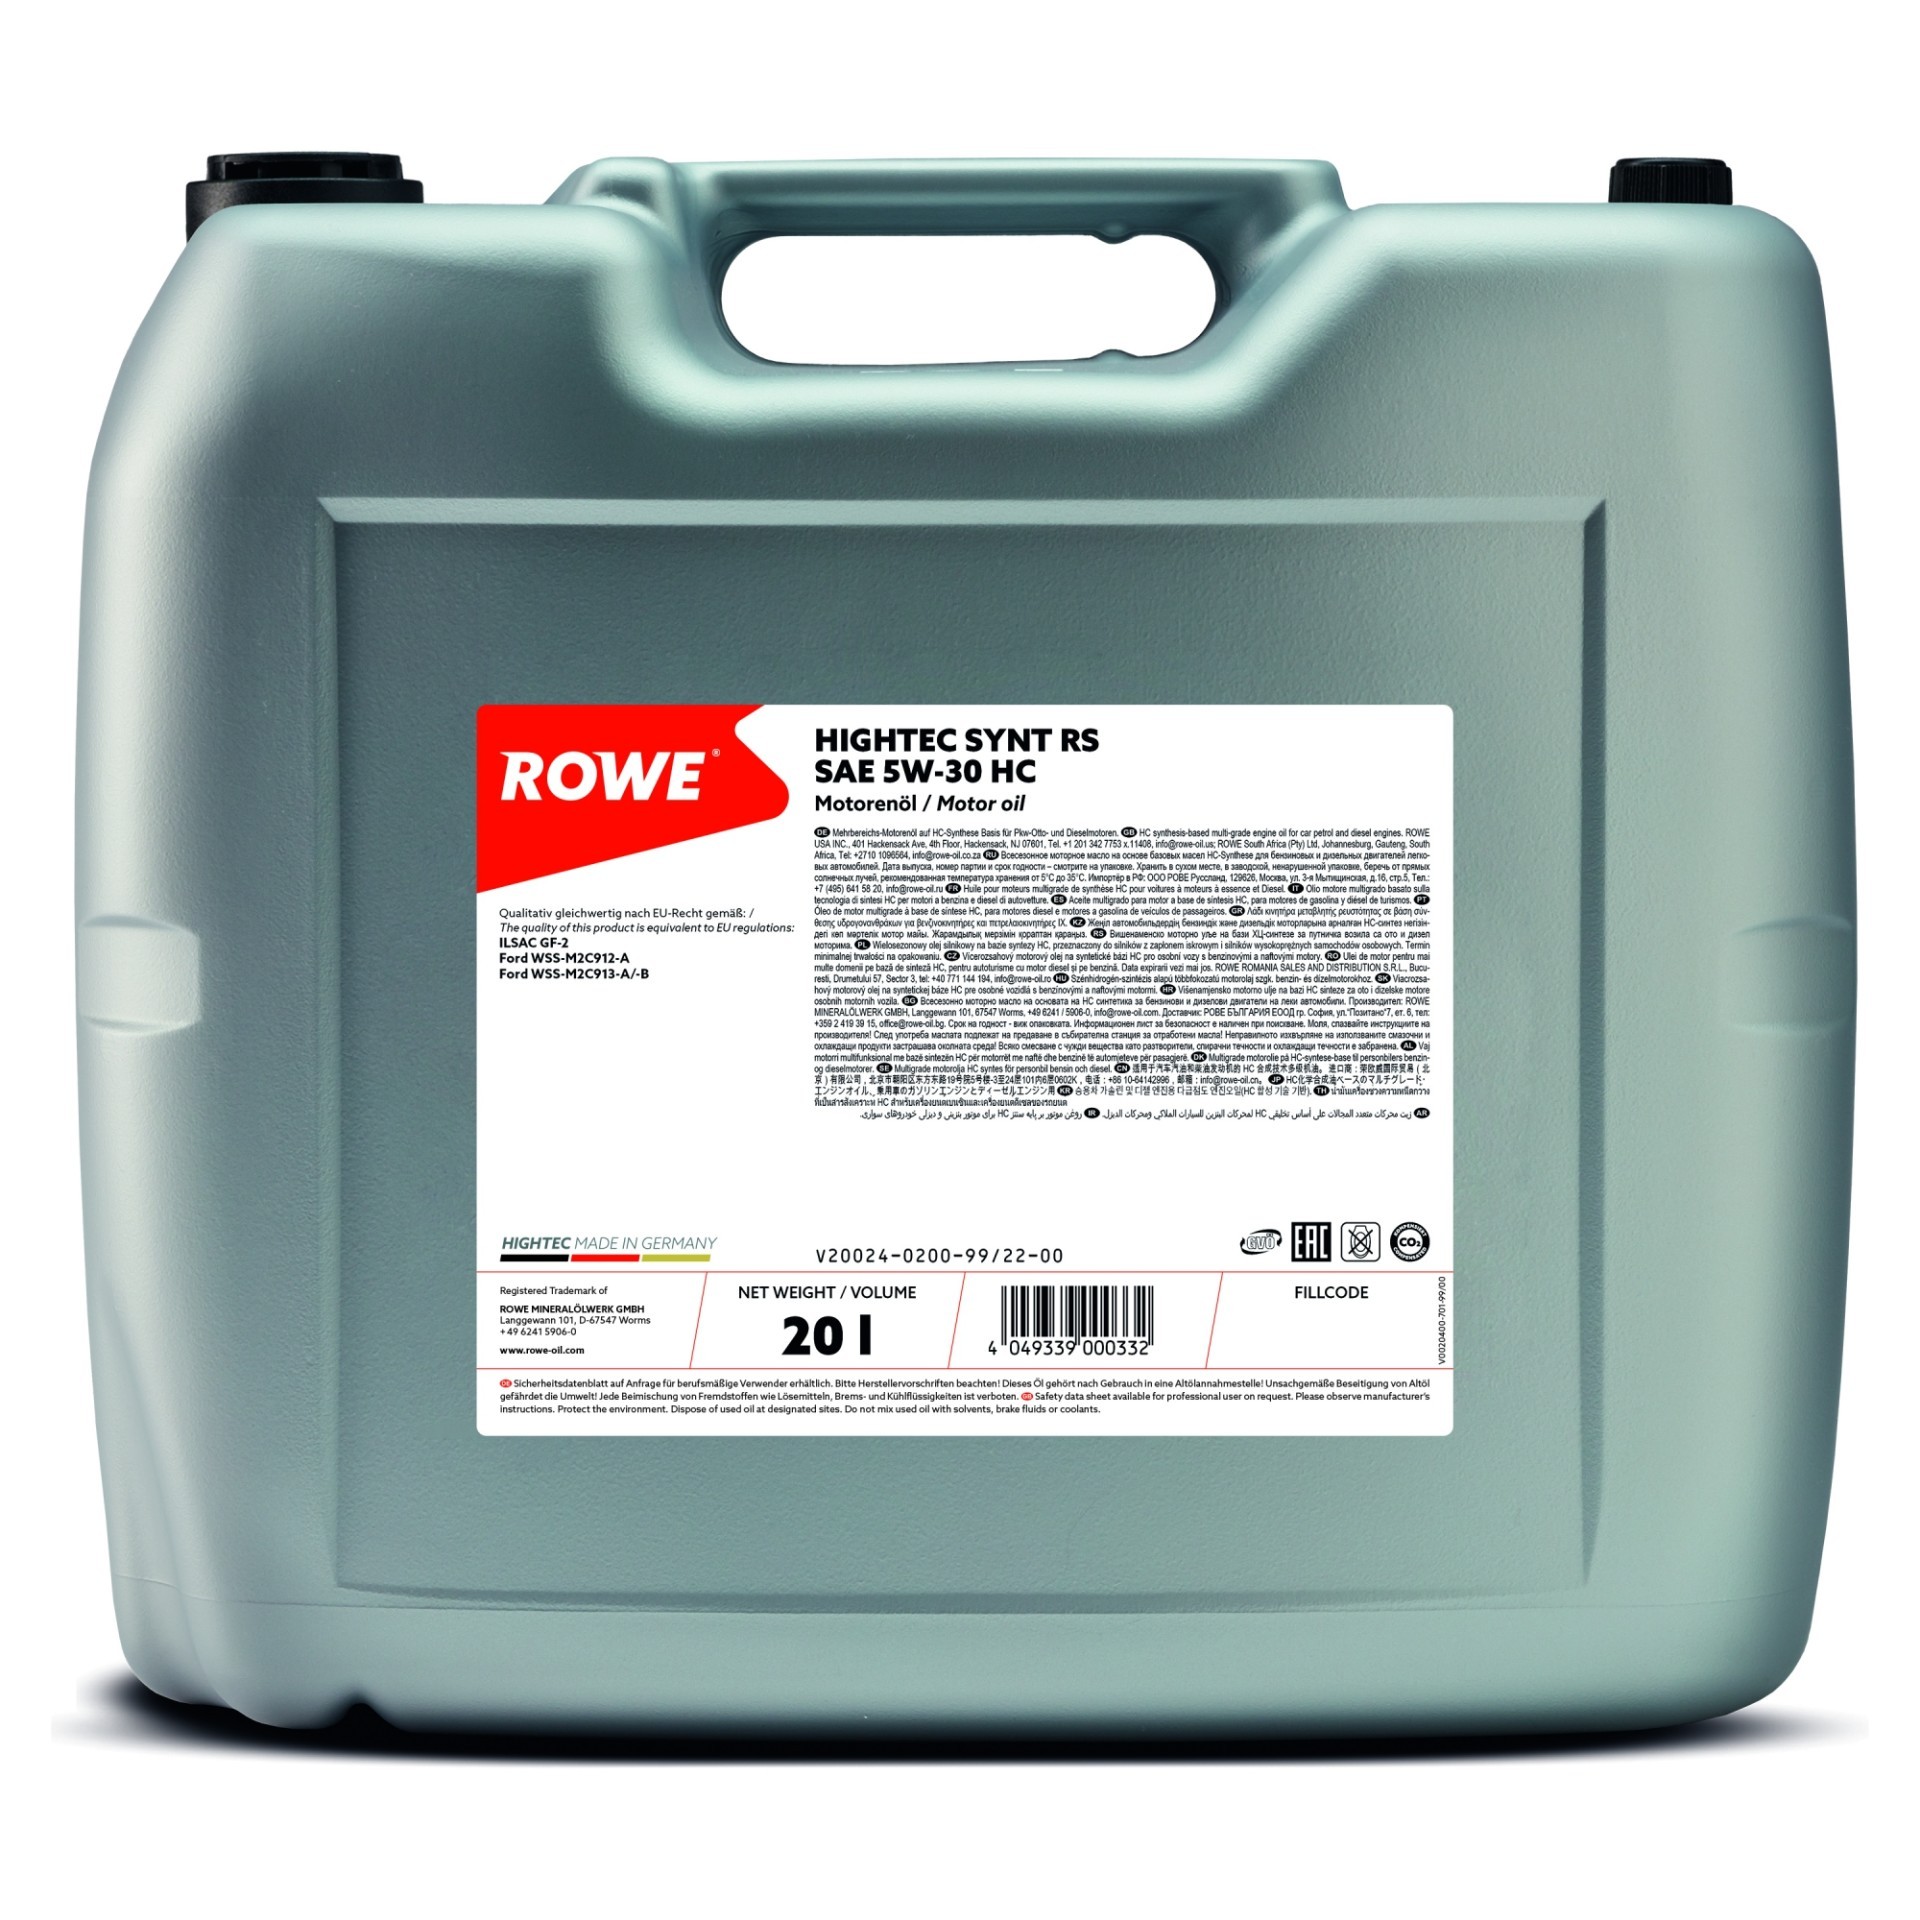 ROWE HIGHTEC SYNT RS SAE 5W-30 HC (20024) 20.0L